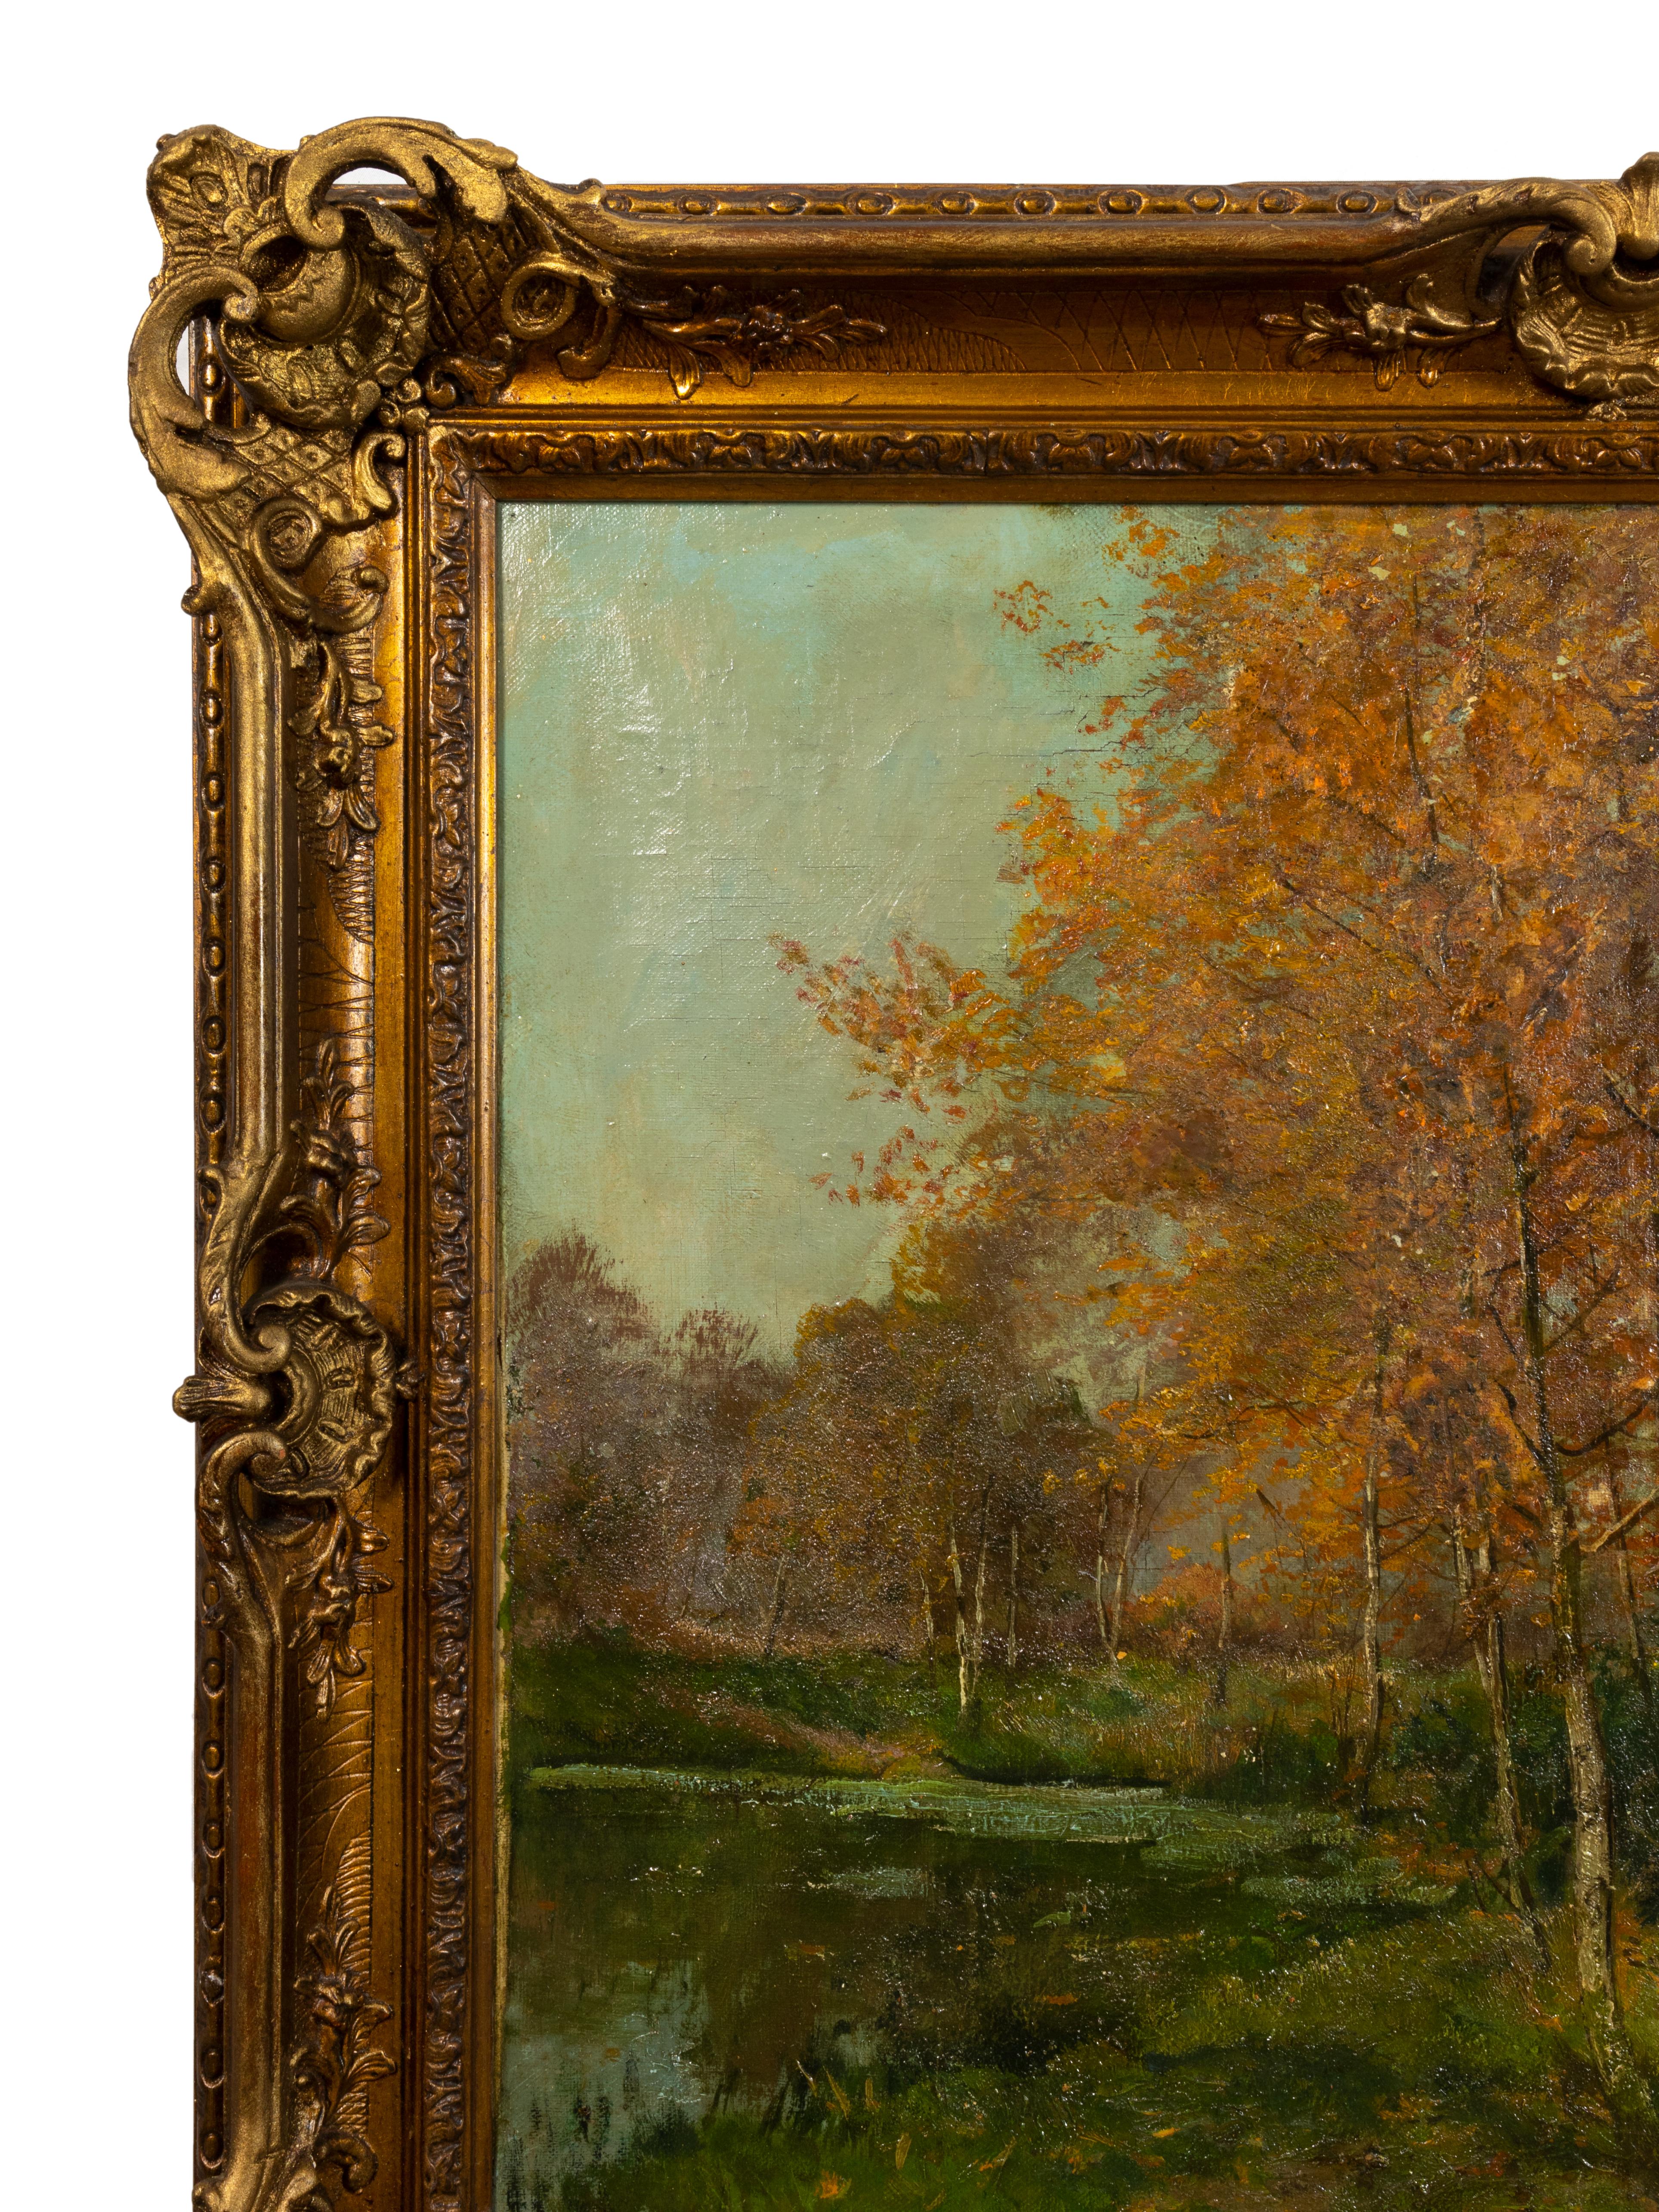 A early 20th Century fox hunting scene in a forest with two riders observing the hunting grounds.  
A painting of a countryside hunting ground in the Autumn. 
Signature imperceptible (lower right).

In the Louis XIV style, the Regency frame retain